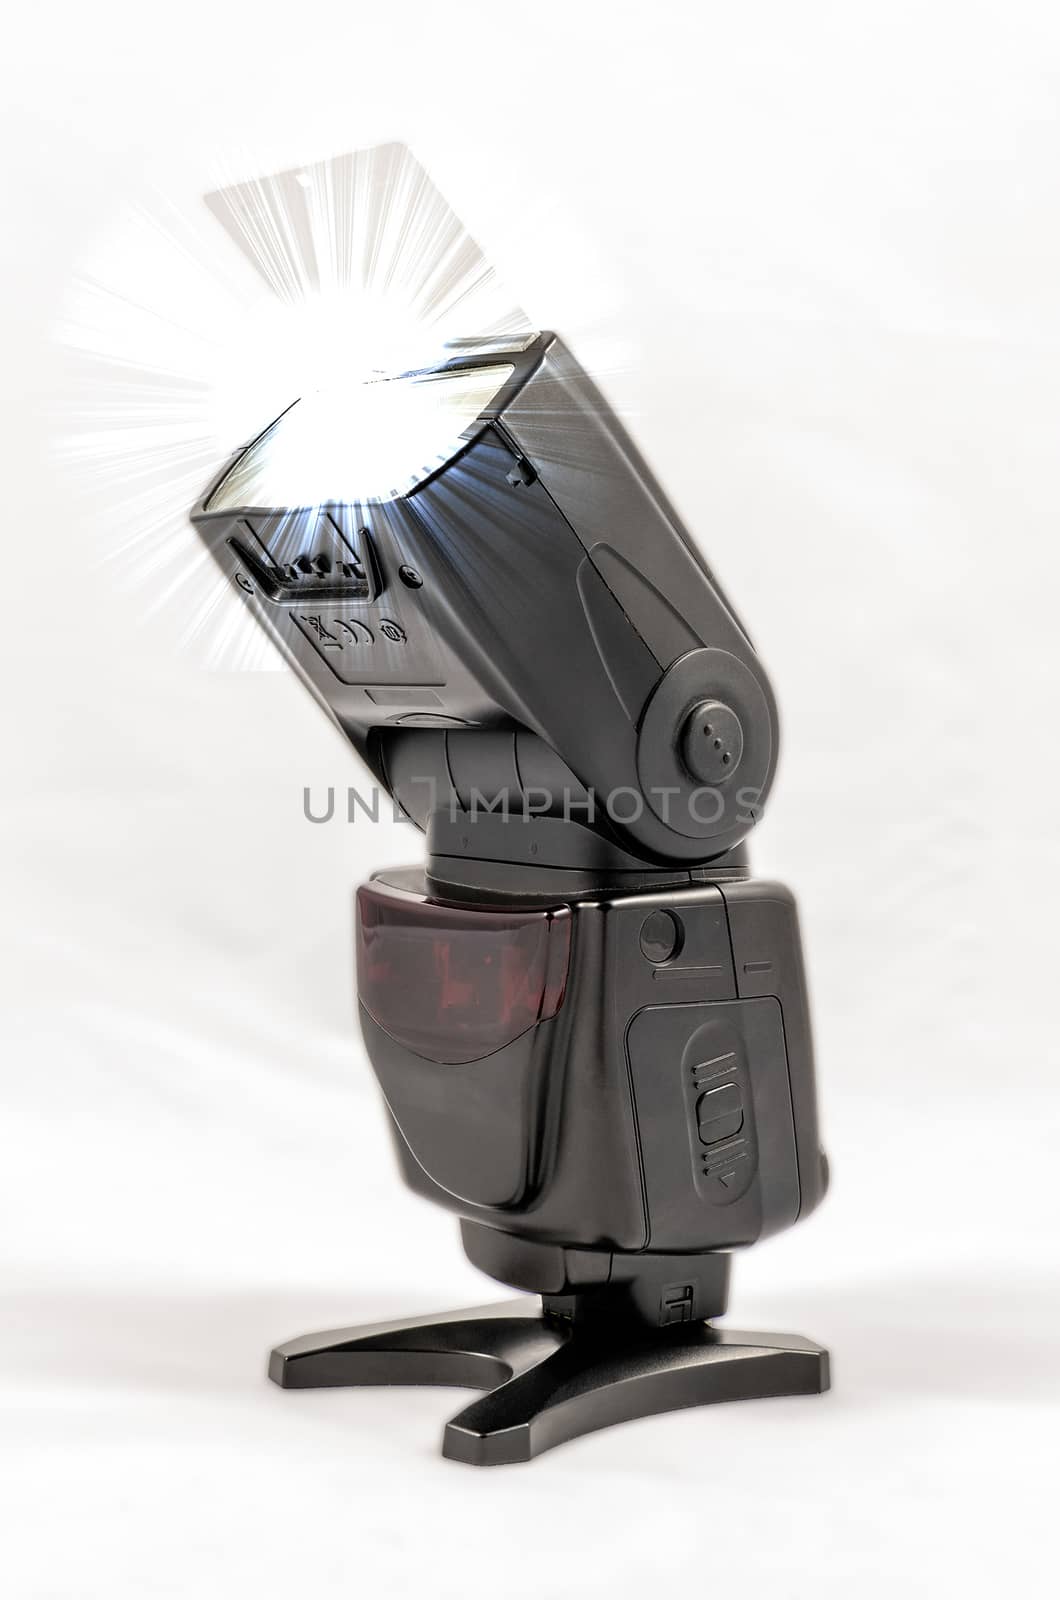 Oblique view of a black unbranded external flash unit for DSLR camera with bounce card extended while shooting